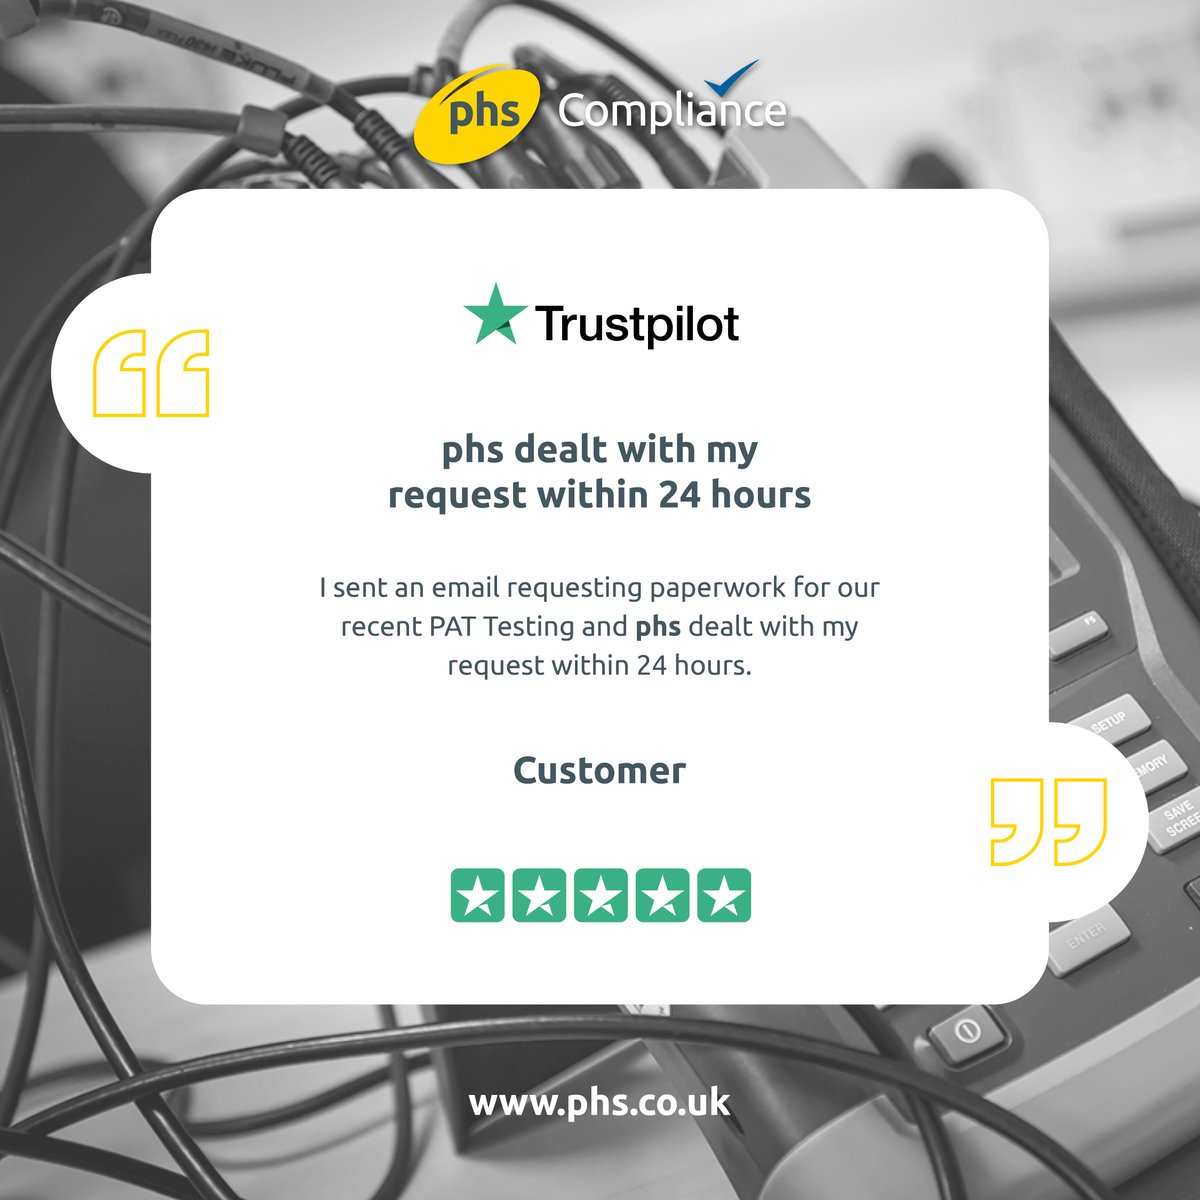 Taking requests from customers is why we are here to help!

The feedback we receive from our customers allows us to understand what makes our business a success and how we can improve in any way we can.

Many thanks, Customer!

#phsPurpose #CustomerFeedback #Trustpilot